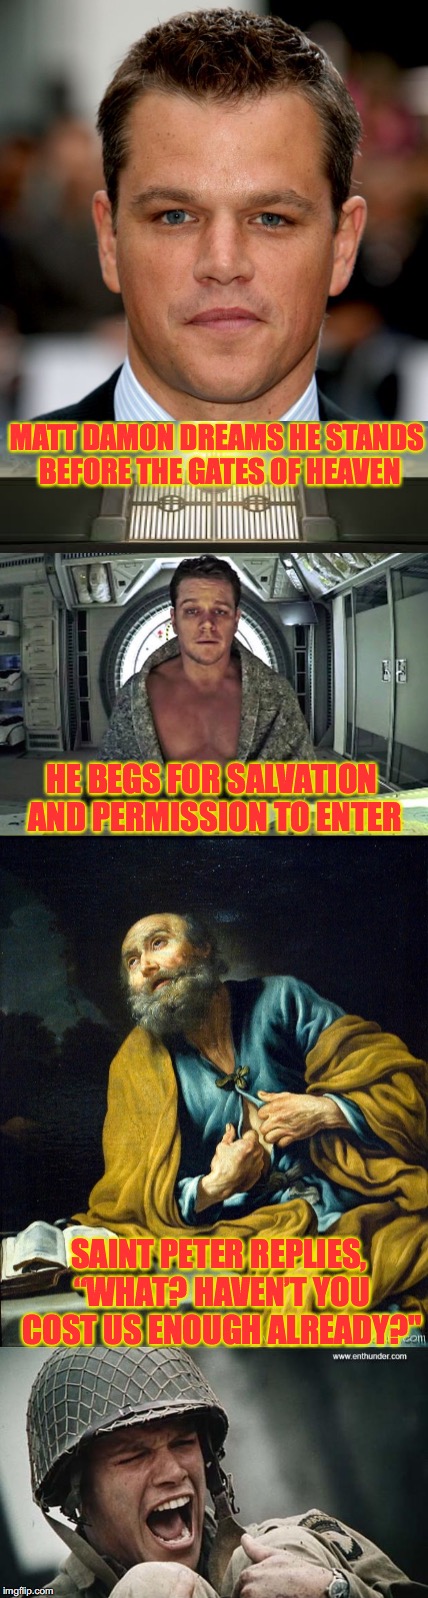 A Nightmare For Matt | MATT DAMON DREAMS HE STANDS BEFORE THE GATES OF HEAVEN; HE BEGS FOR SALVATION AND PERMISSION TO ENTER; SAINT PETER REPLIES, “WHAT? HAVEN’T YOU COST US ENOUGH ALREADY?" | image tagged in matt damon,heaven,judgement | made w/ Imgflip meme maker